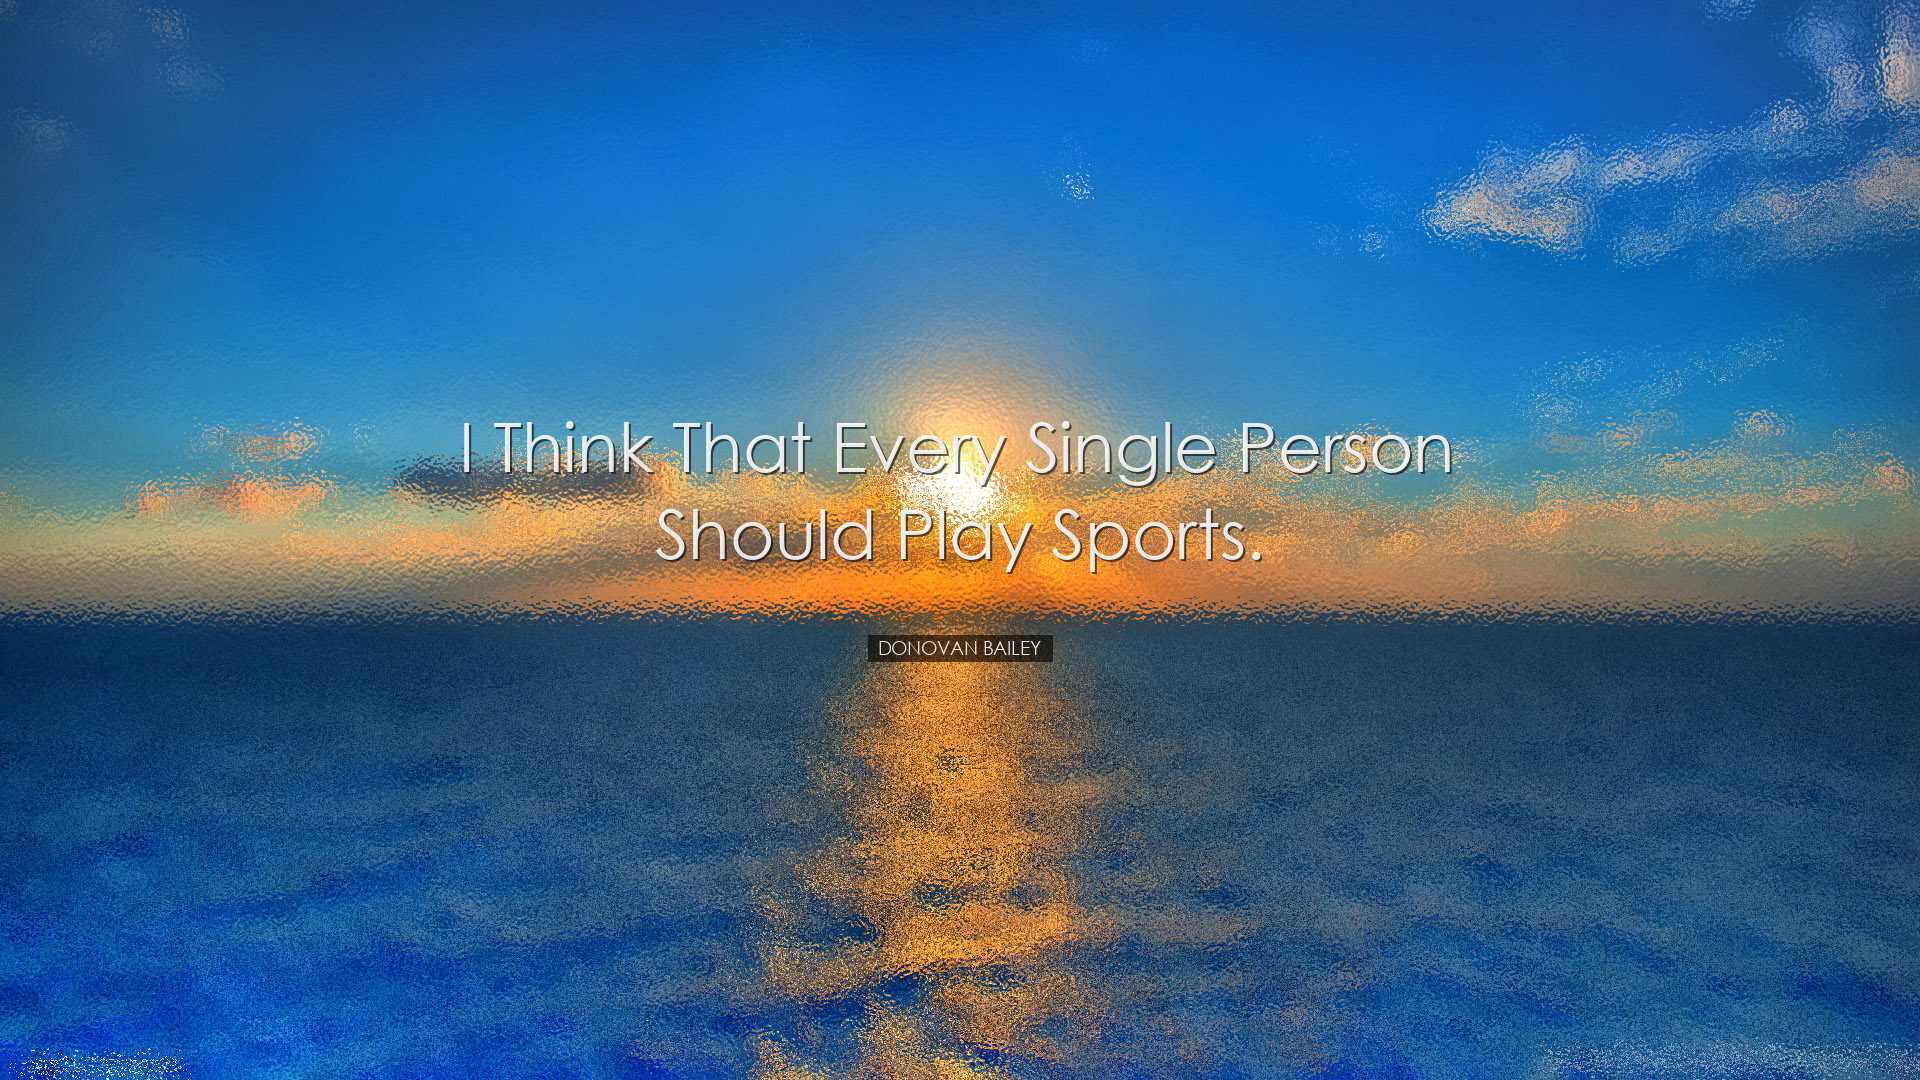 I think that every single person should play sports. - Donovan Bai